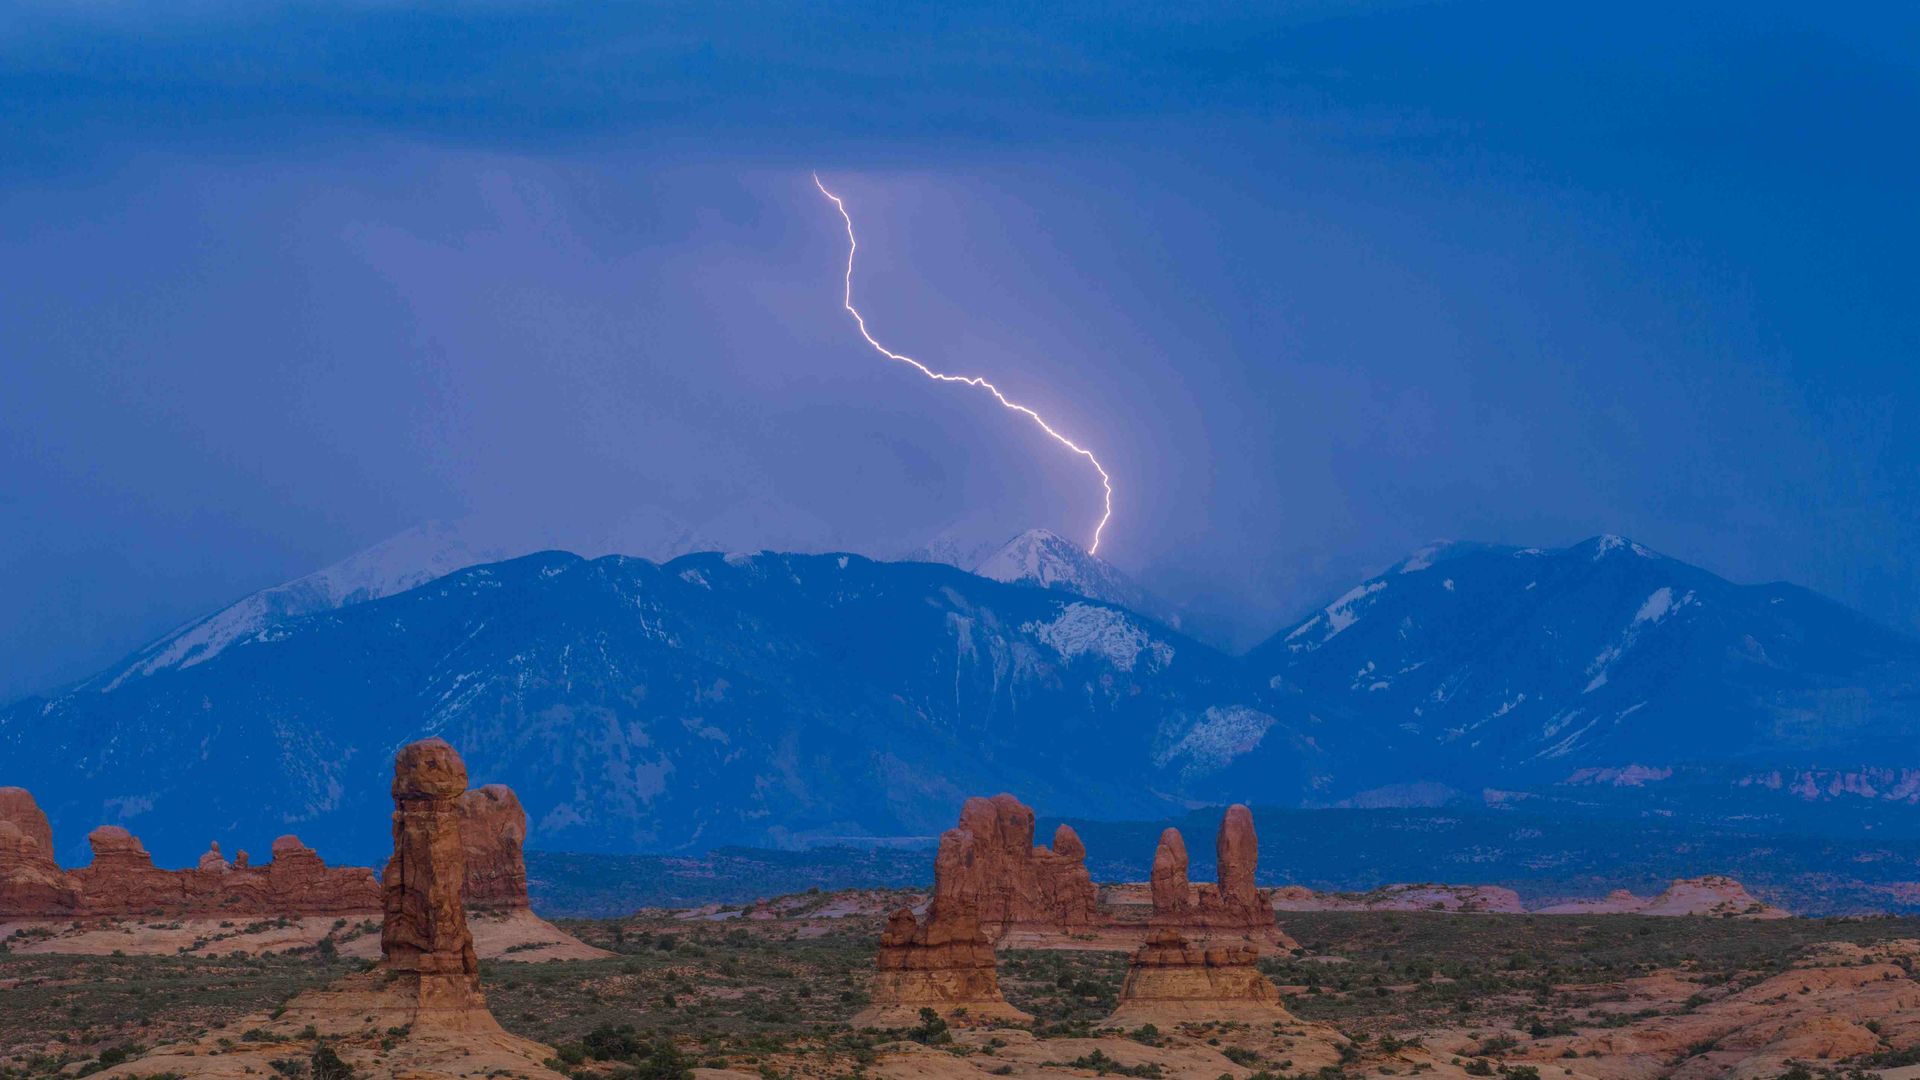 Lightning hits a mountain range behind red rock formations